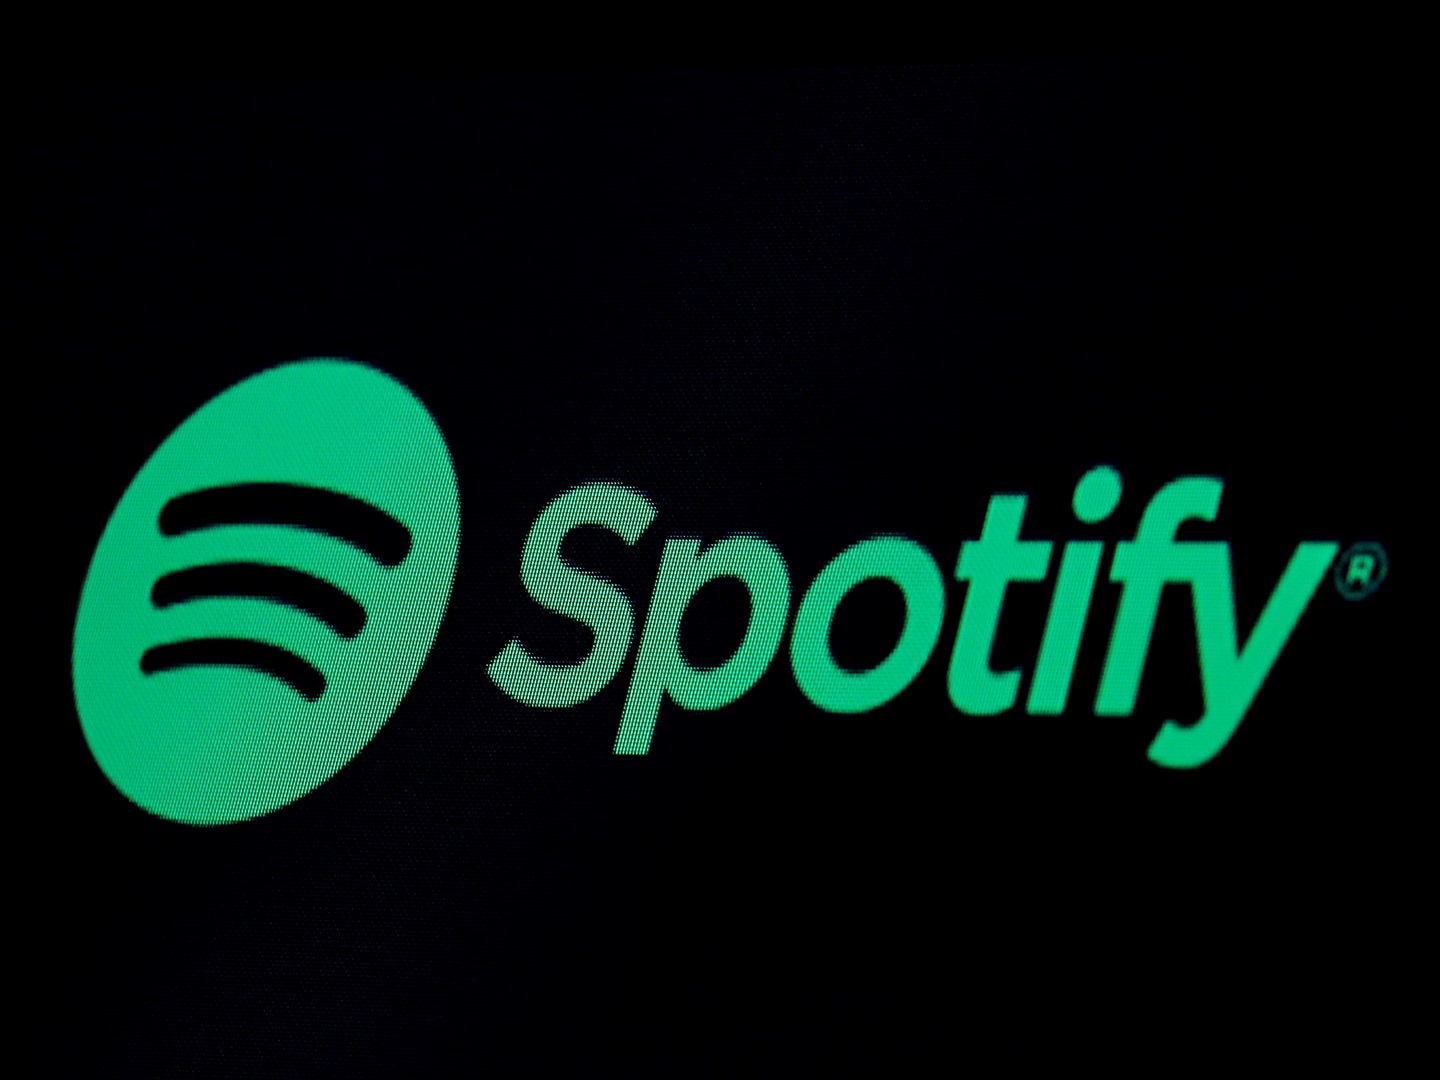 Spotify said it planned to appeal the decision.  